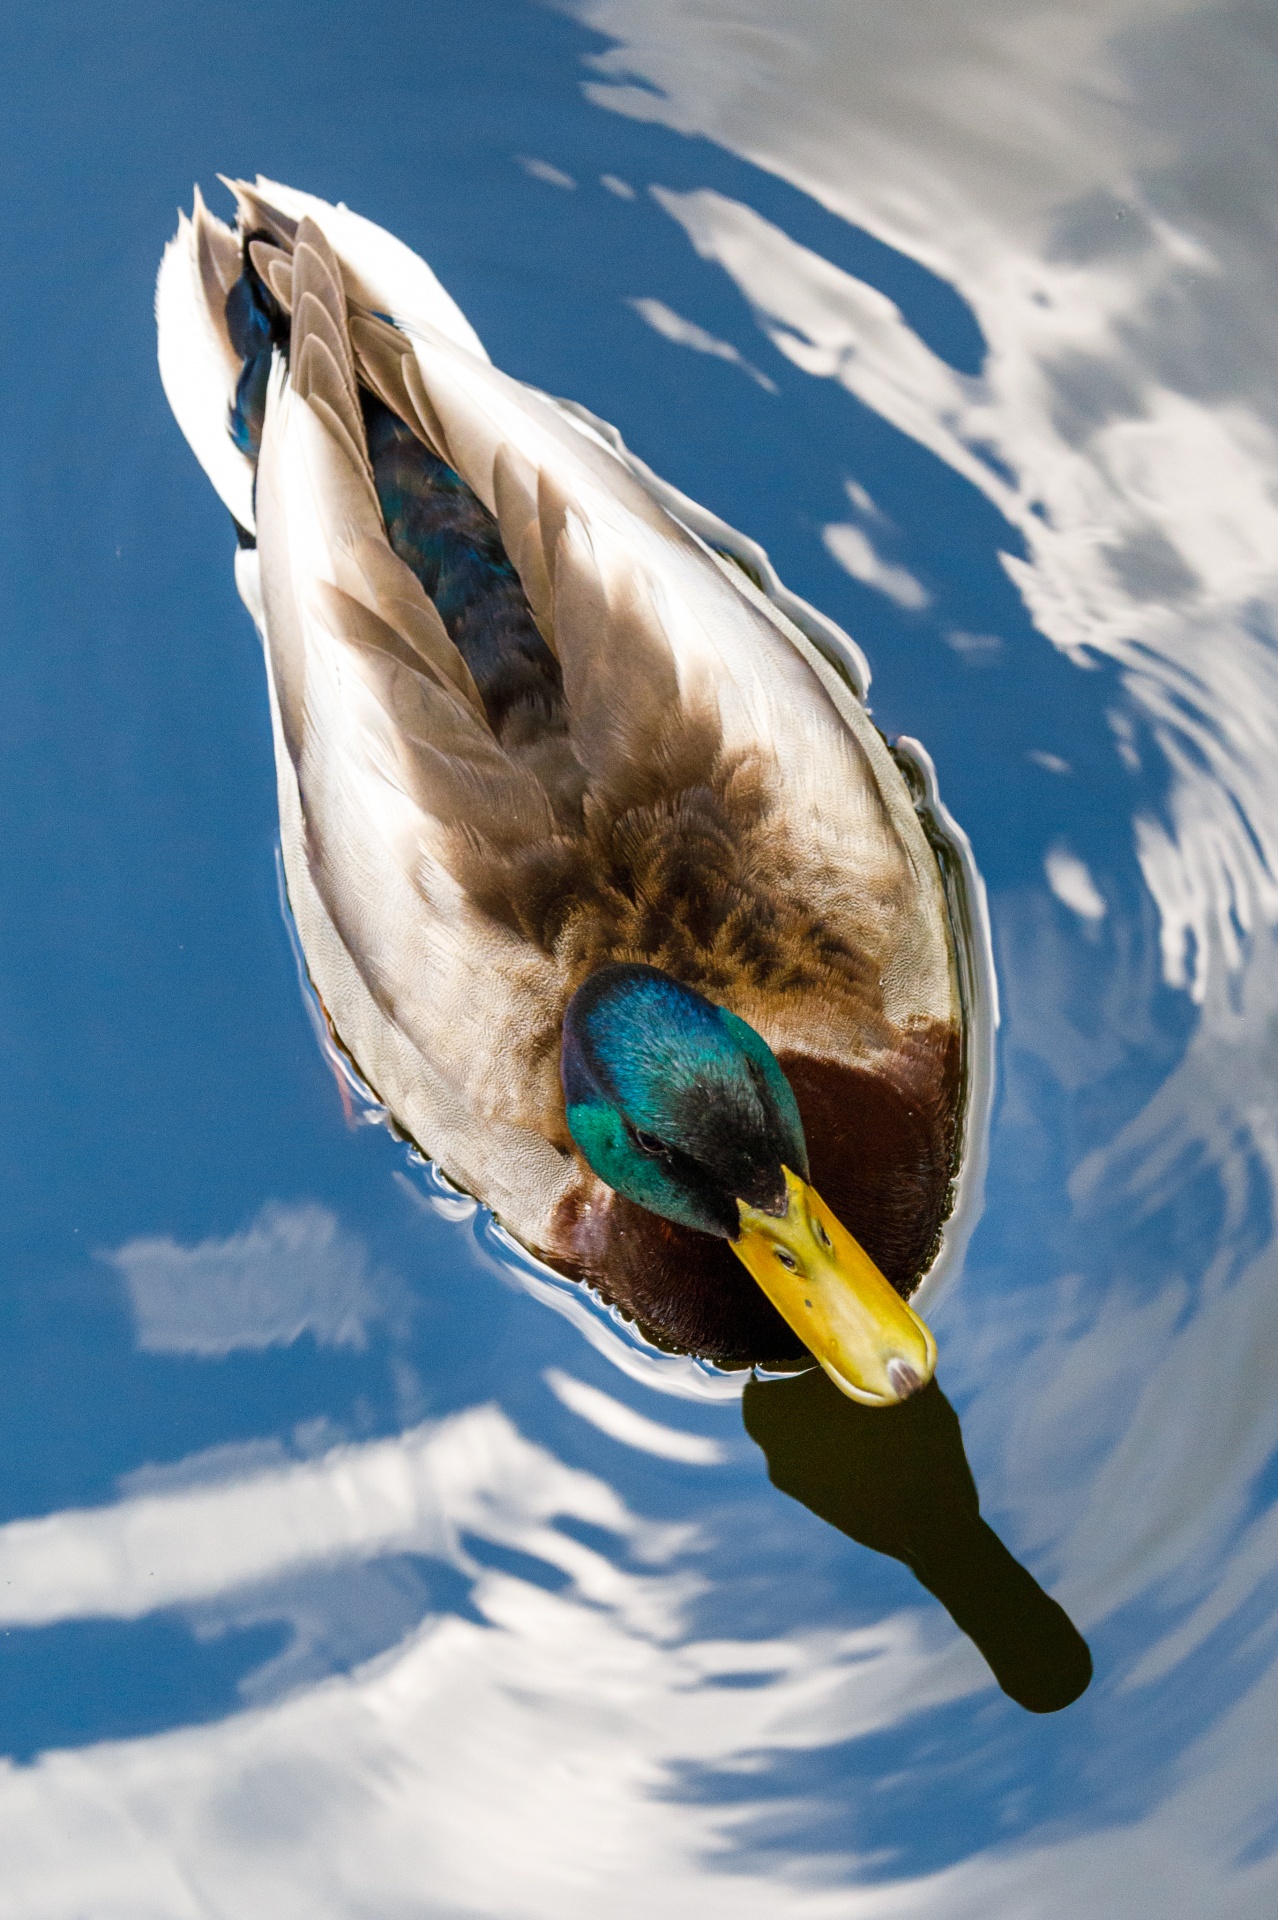 Image of a mallard duck swimming from above